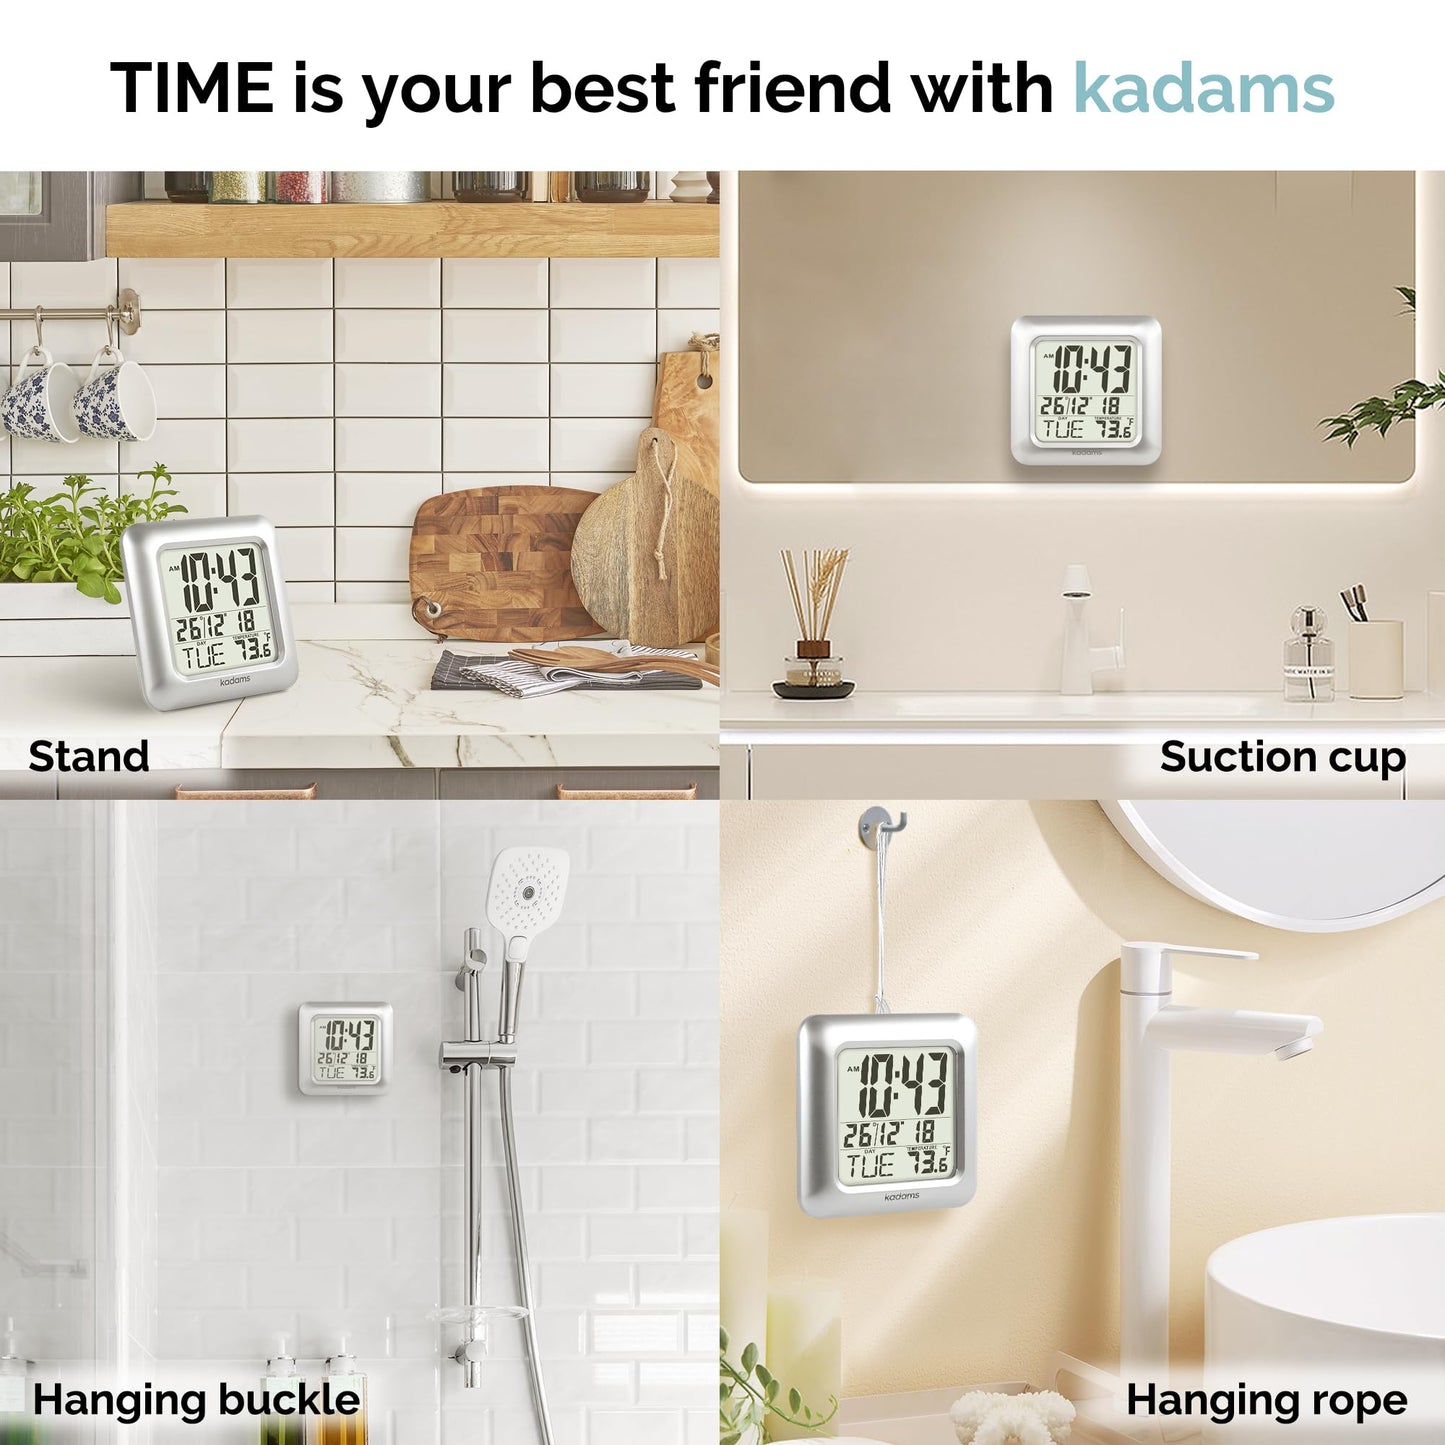 KADAMS Bathroom Shower Digital Wall Clock - Water Resistant - Large Display LED Wall Clock - Seconds Counter - Temperature & Calendar Display - Suction Cup, Multiple Mounting Options (Silver)